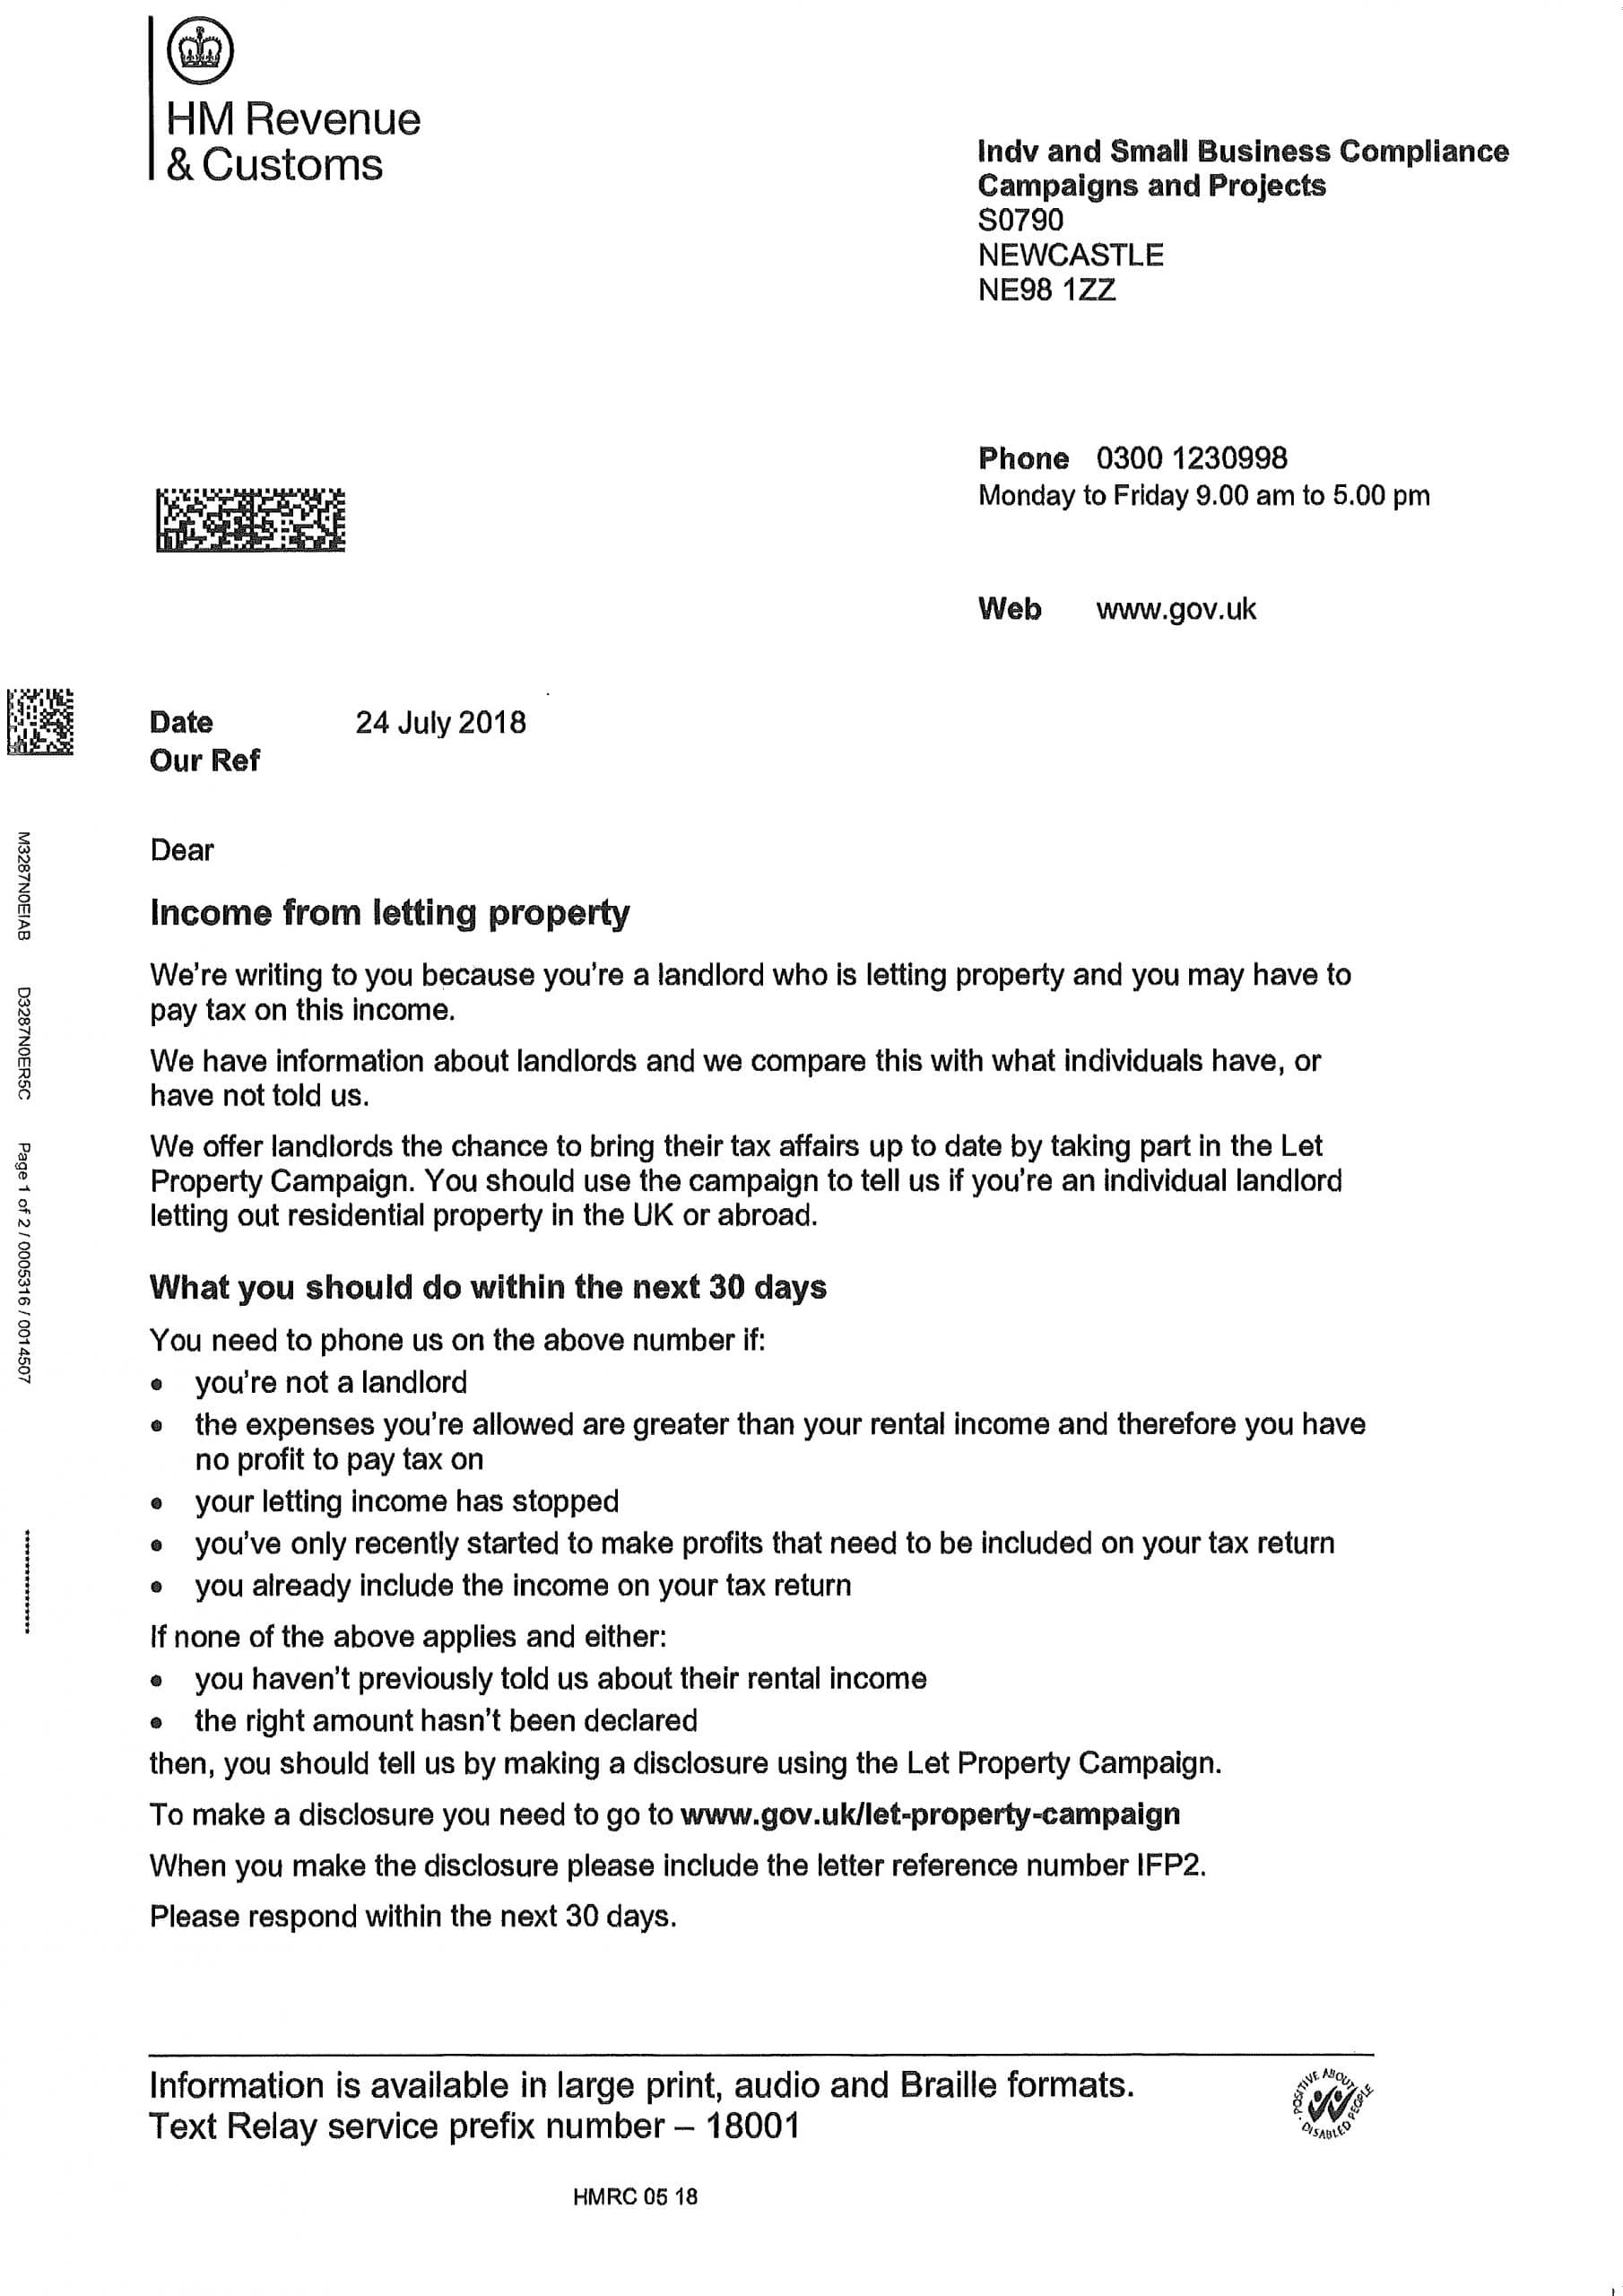 Letter from Hmrc for Income from letting property